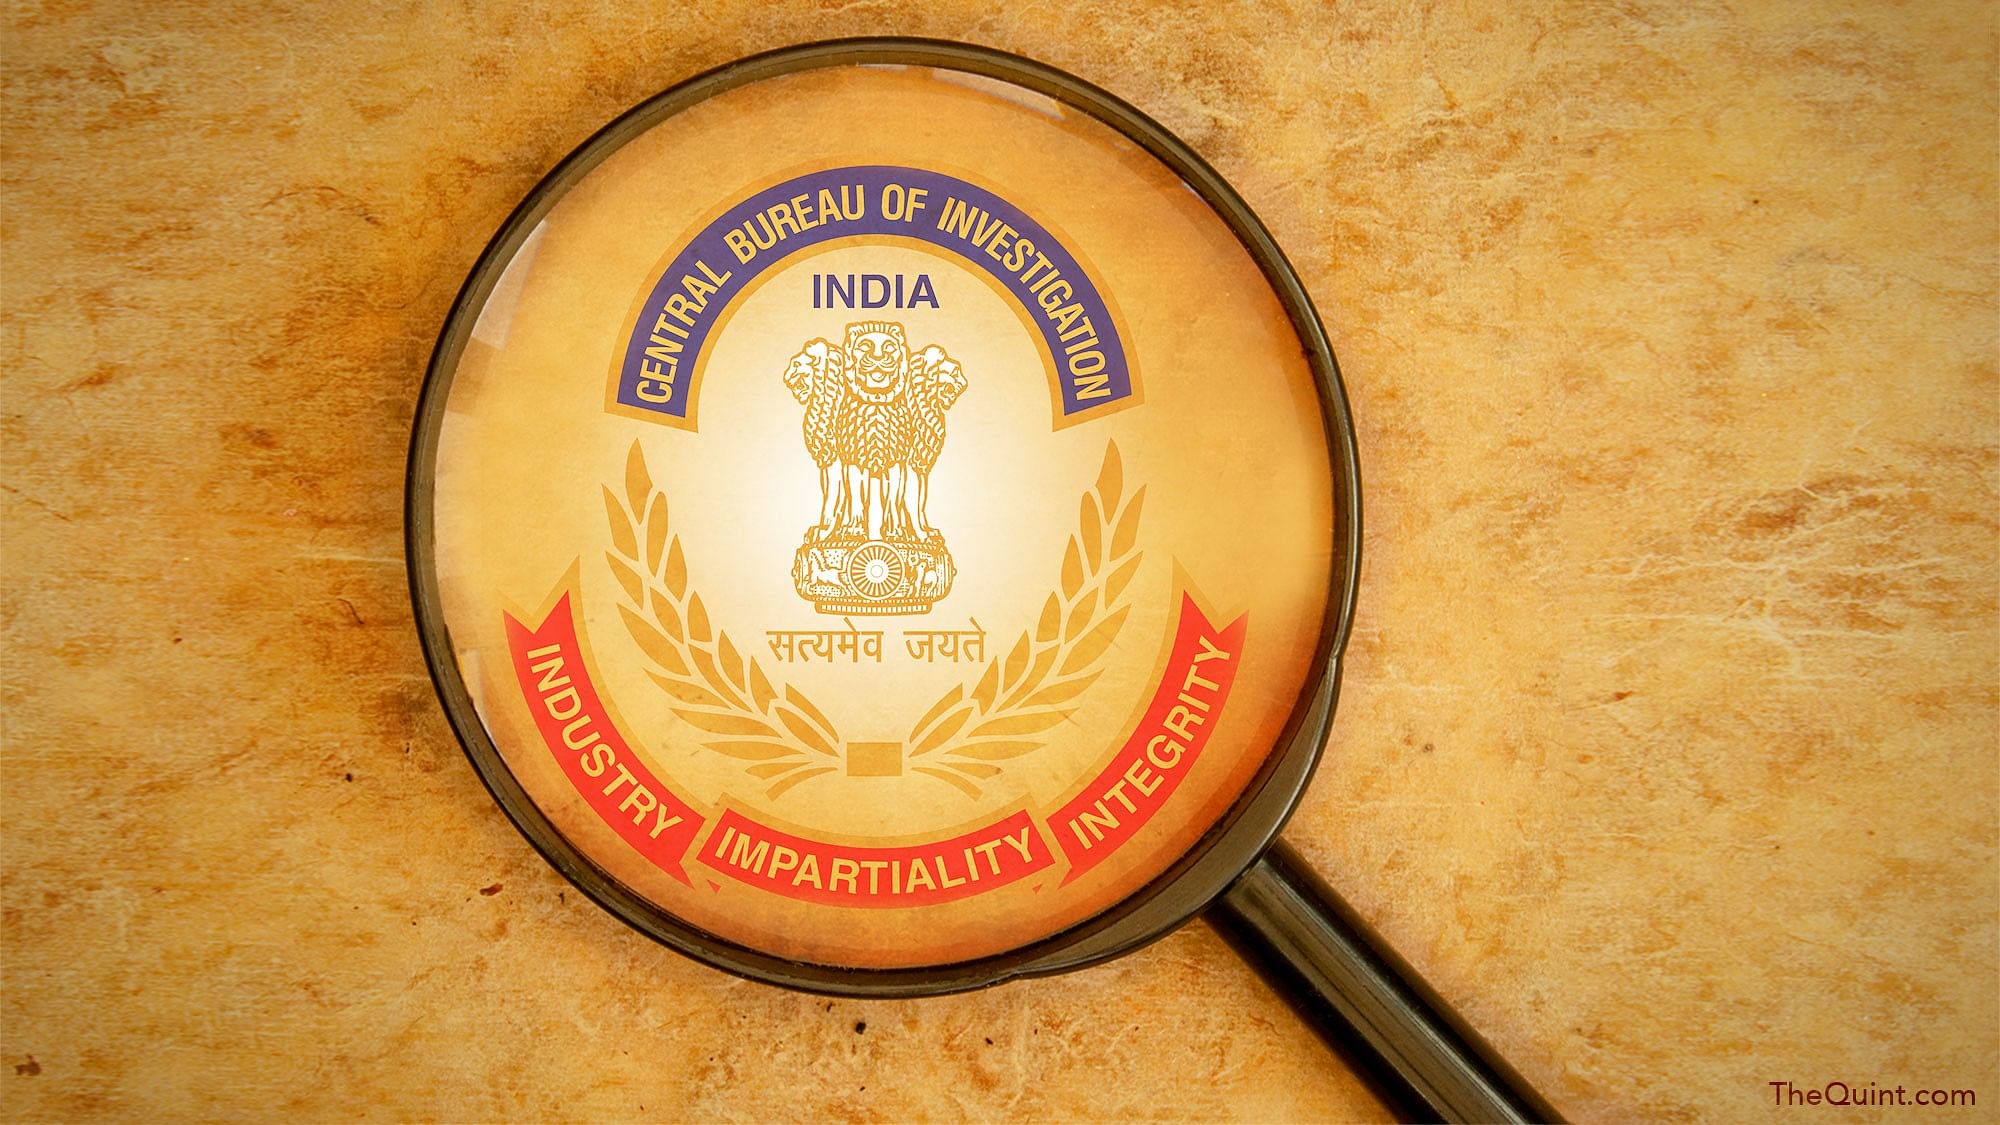 The CBI has booked a Hyderabad-based construction and infrastructure company for allegedly defrauding a consortium of eight banks to the tune of over Rs 1,394 crore.